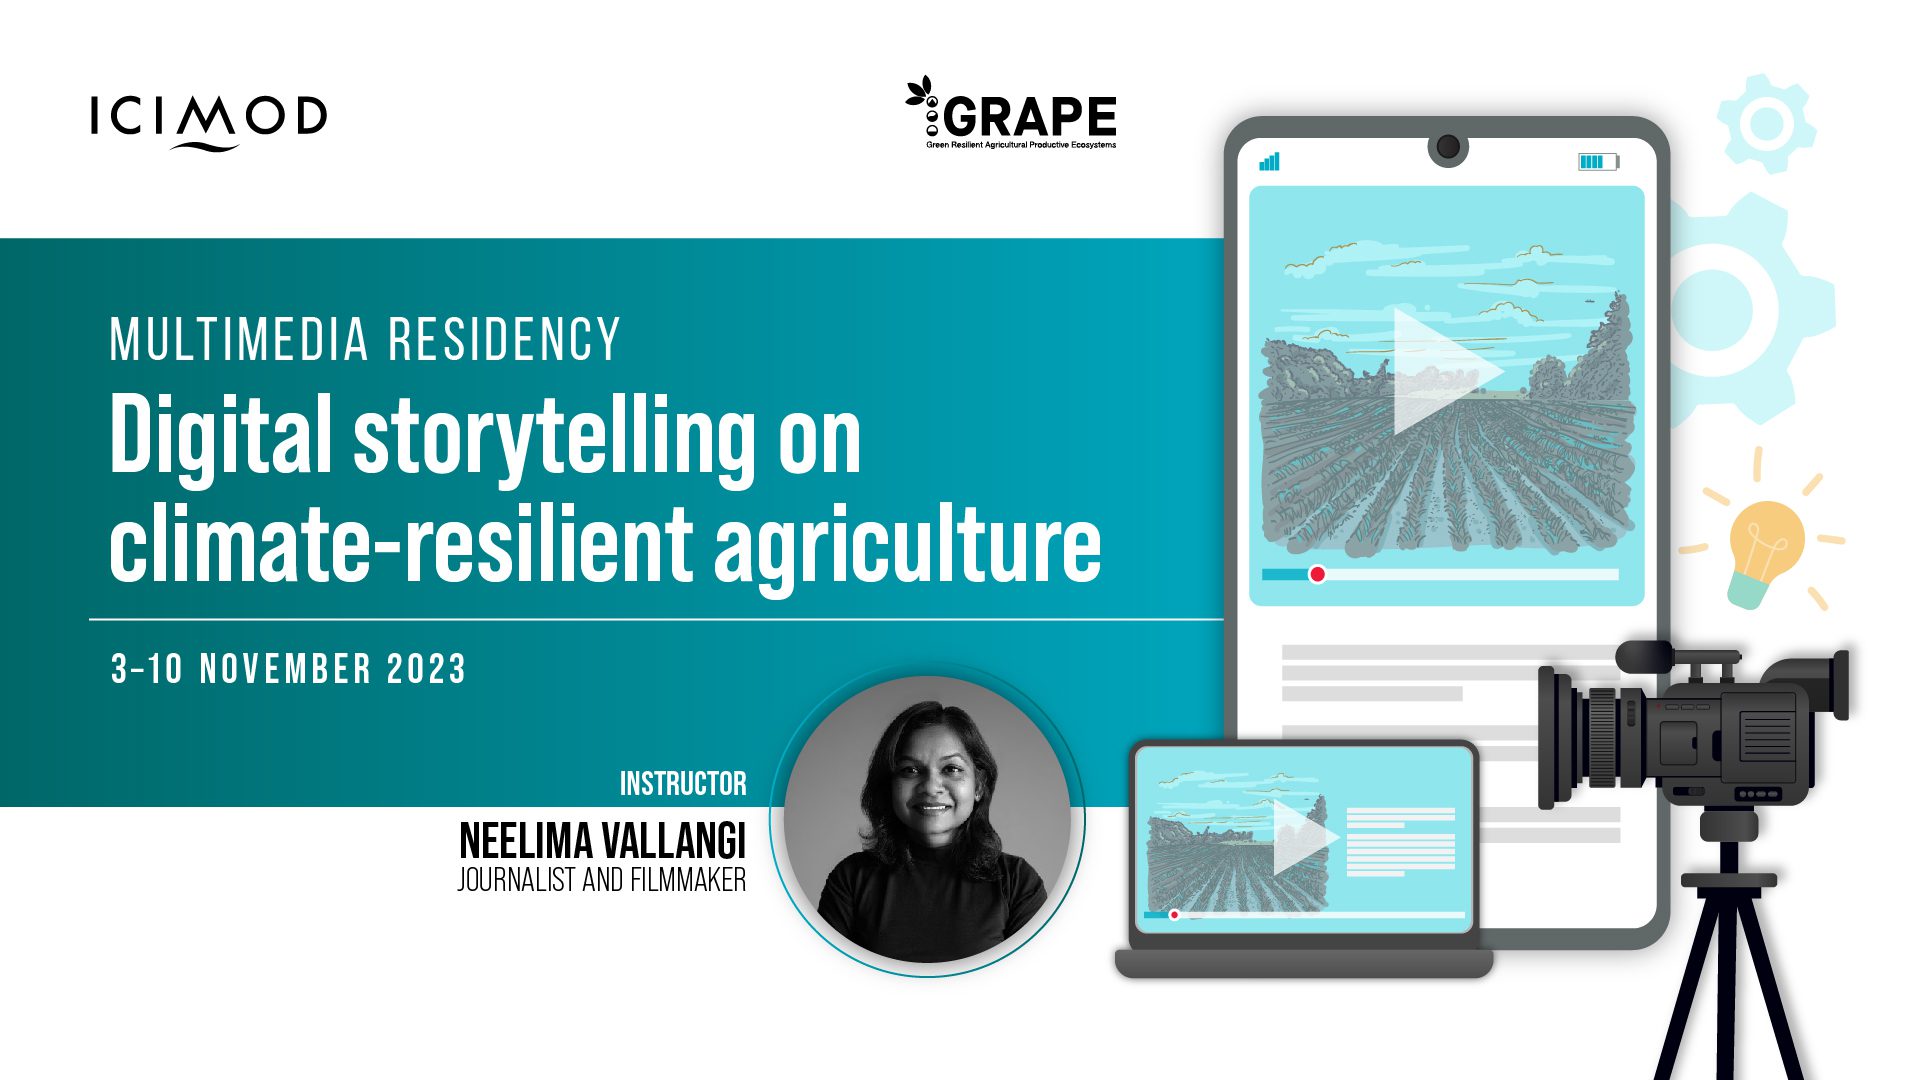 Digital storytelling on climate-resilient agriculture